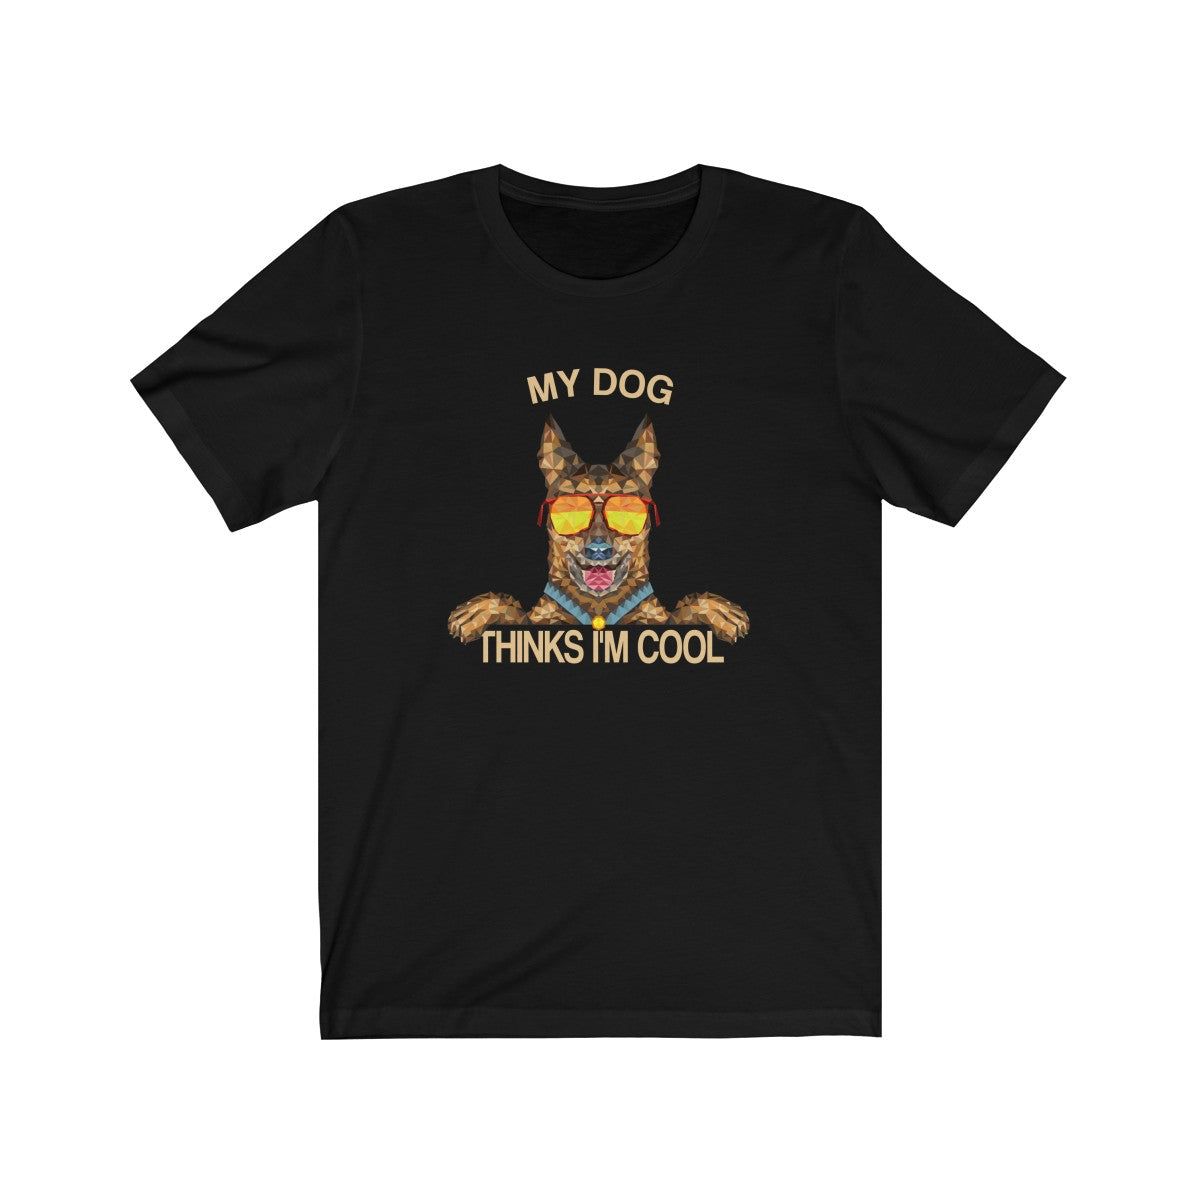 My Dog Thinks Im Cool, Funny Belgian German Shepherd Dog Pet Puppy Malinois T-Shirt, Gift for Dog Owner Lover Starcove Fashion